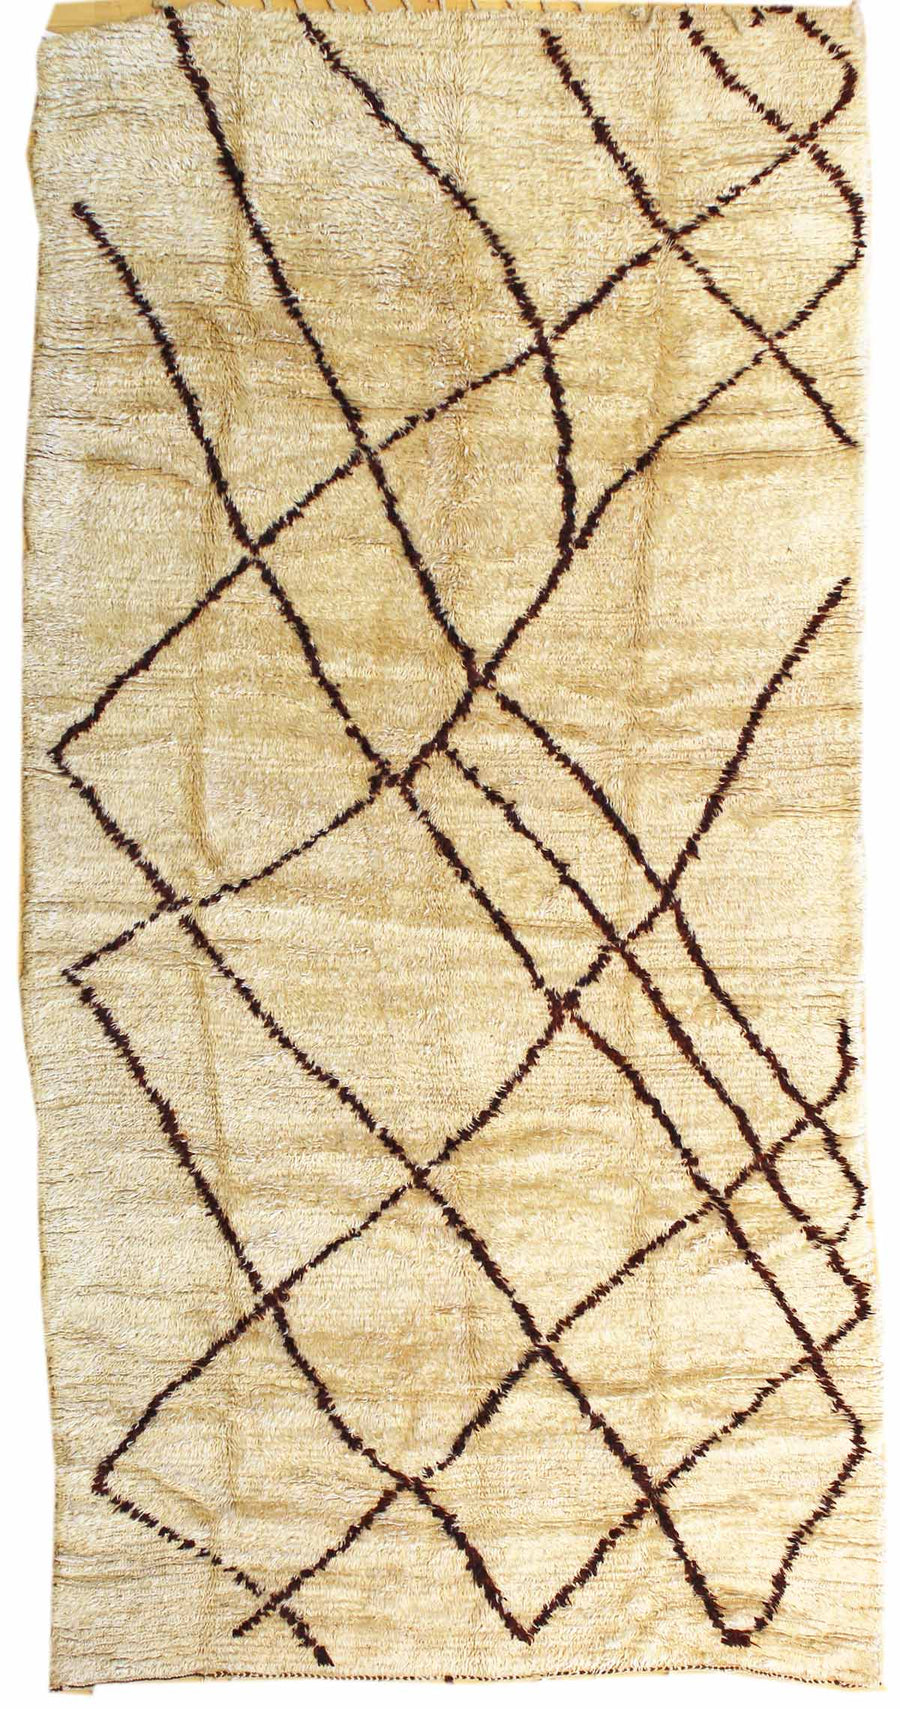 BENI OURAINE HANDKNOTTED RUG, J38946